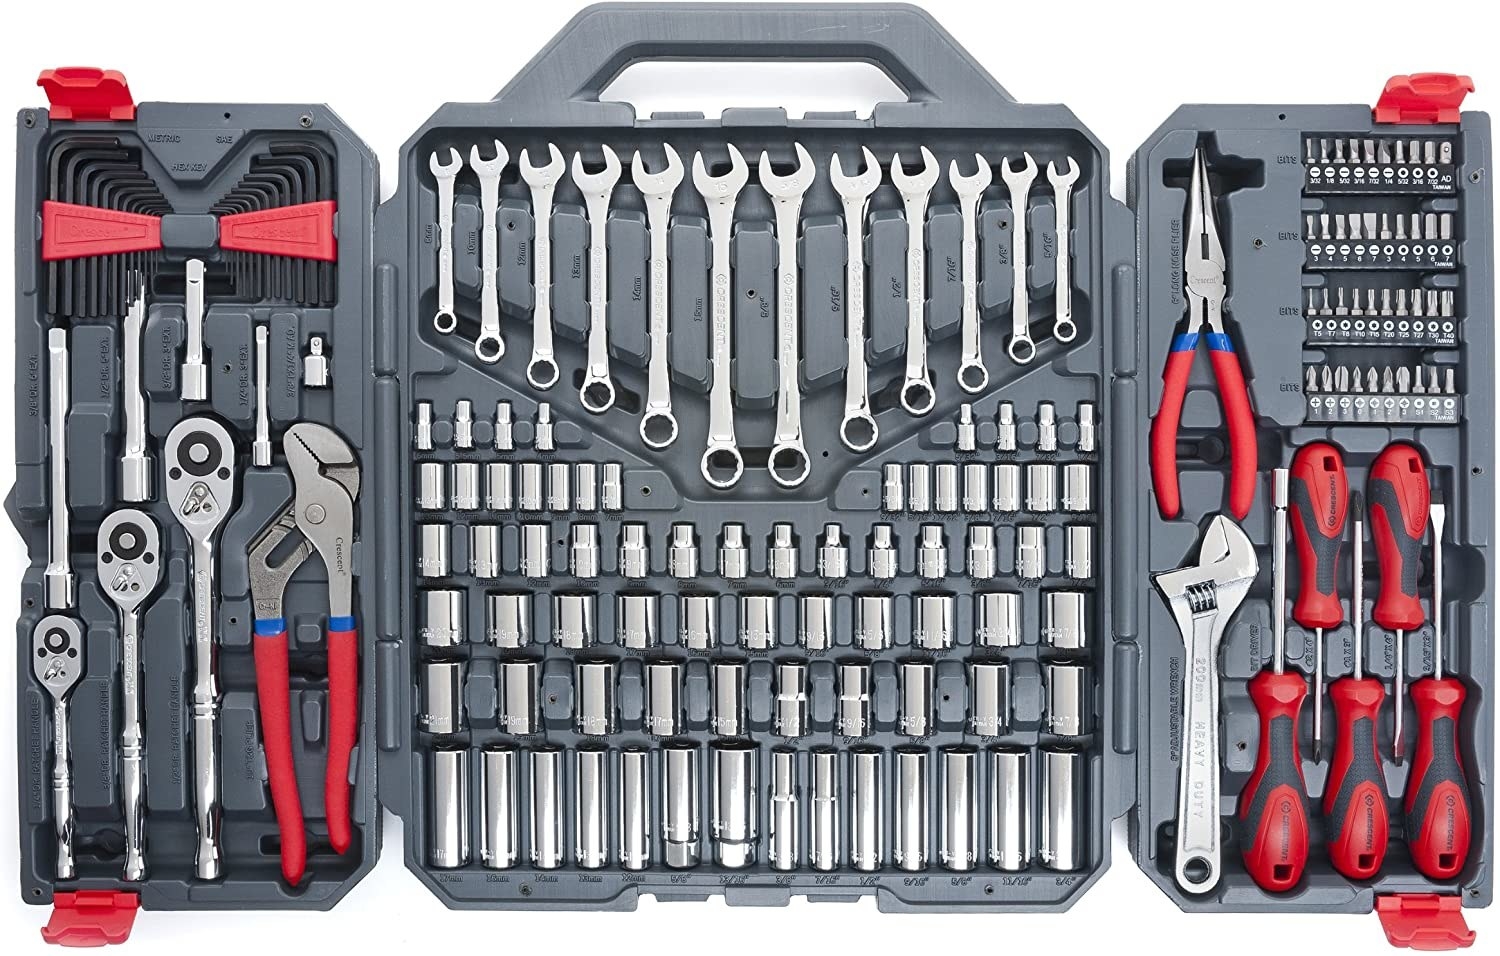 the tool kit in a carrying case